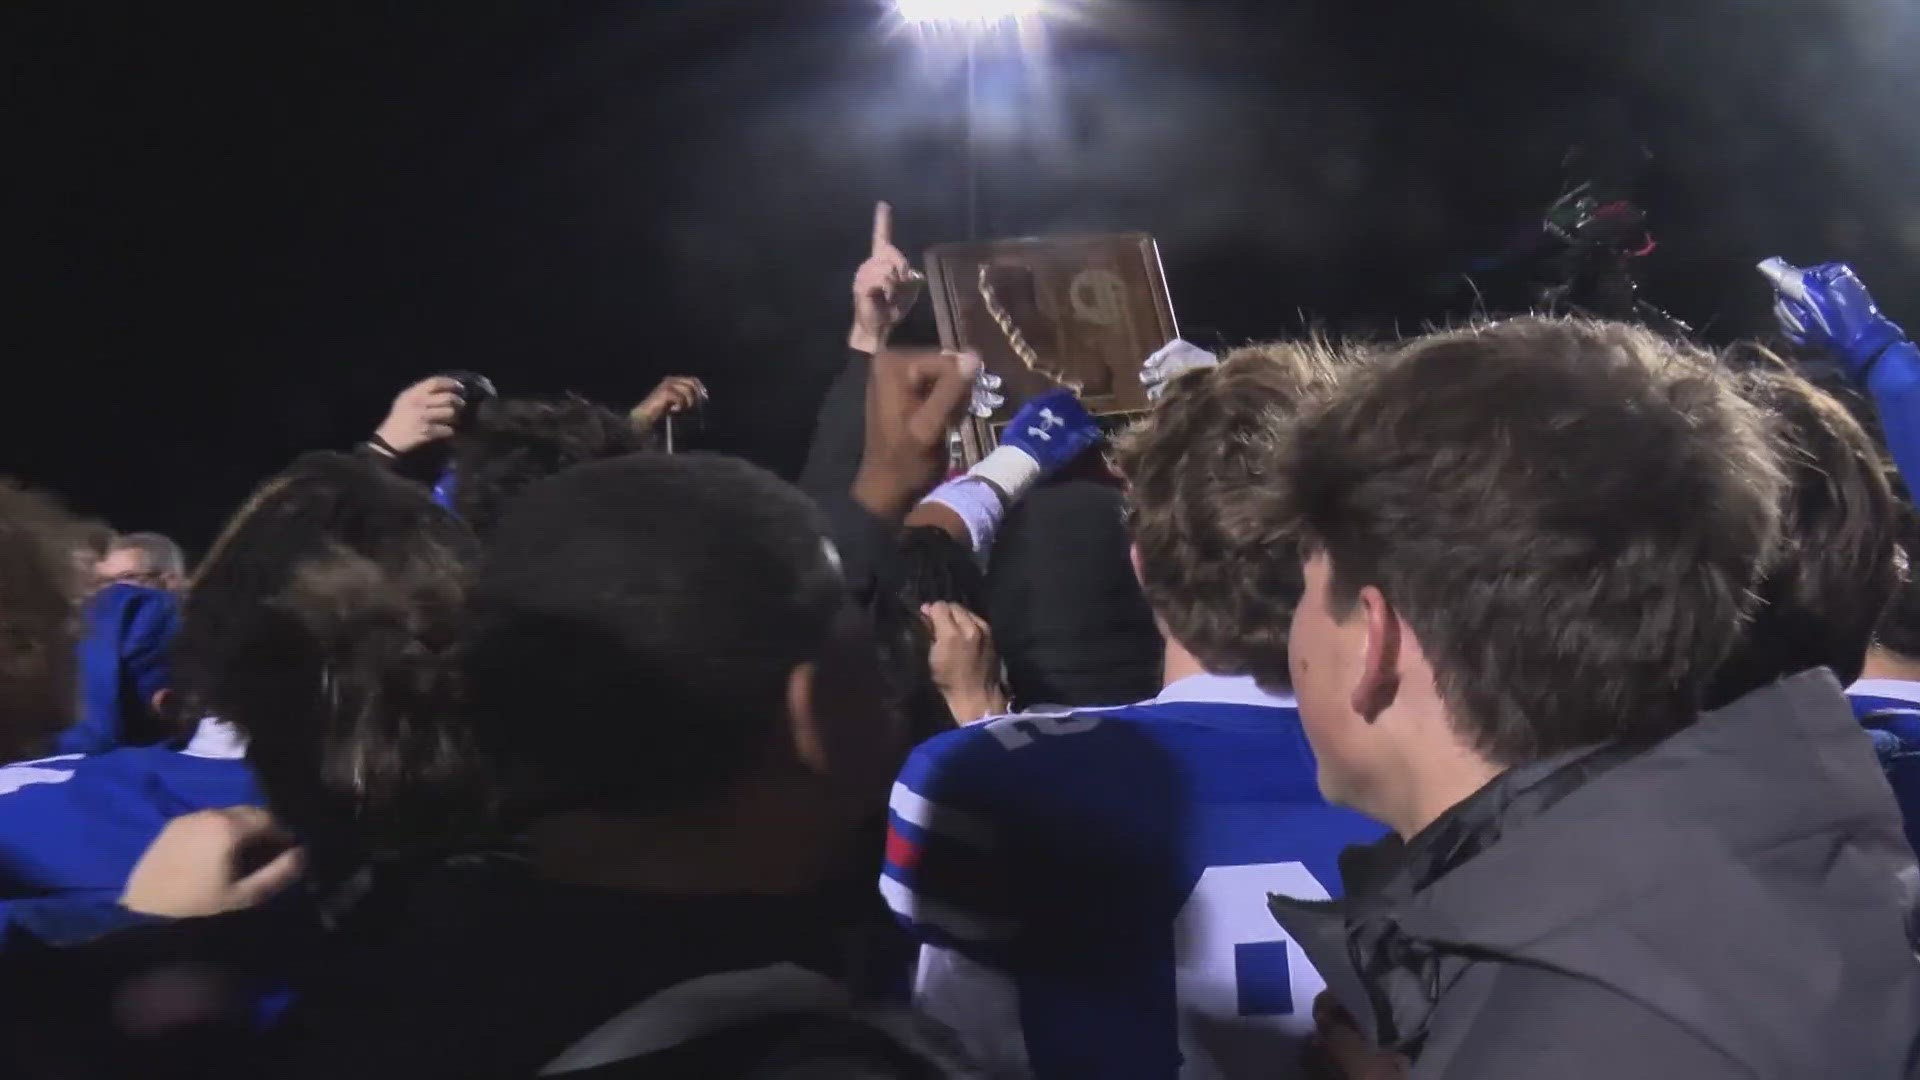 The Folsom High School Bulldogs are seeking their 1st state championship in 3 years. But to do so, they'll have to clash with St. Bonaventure High.